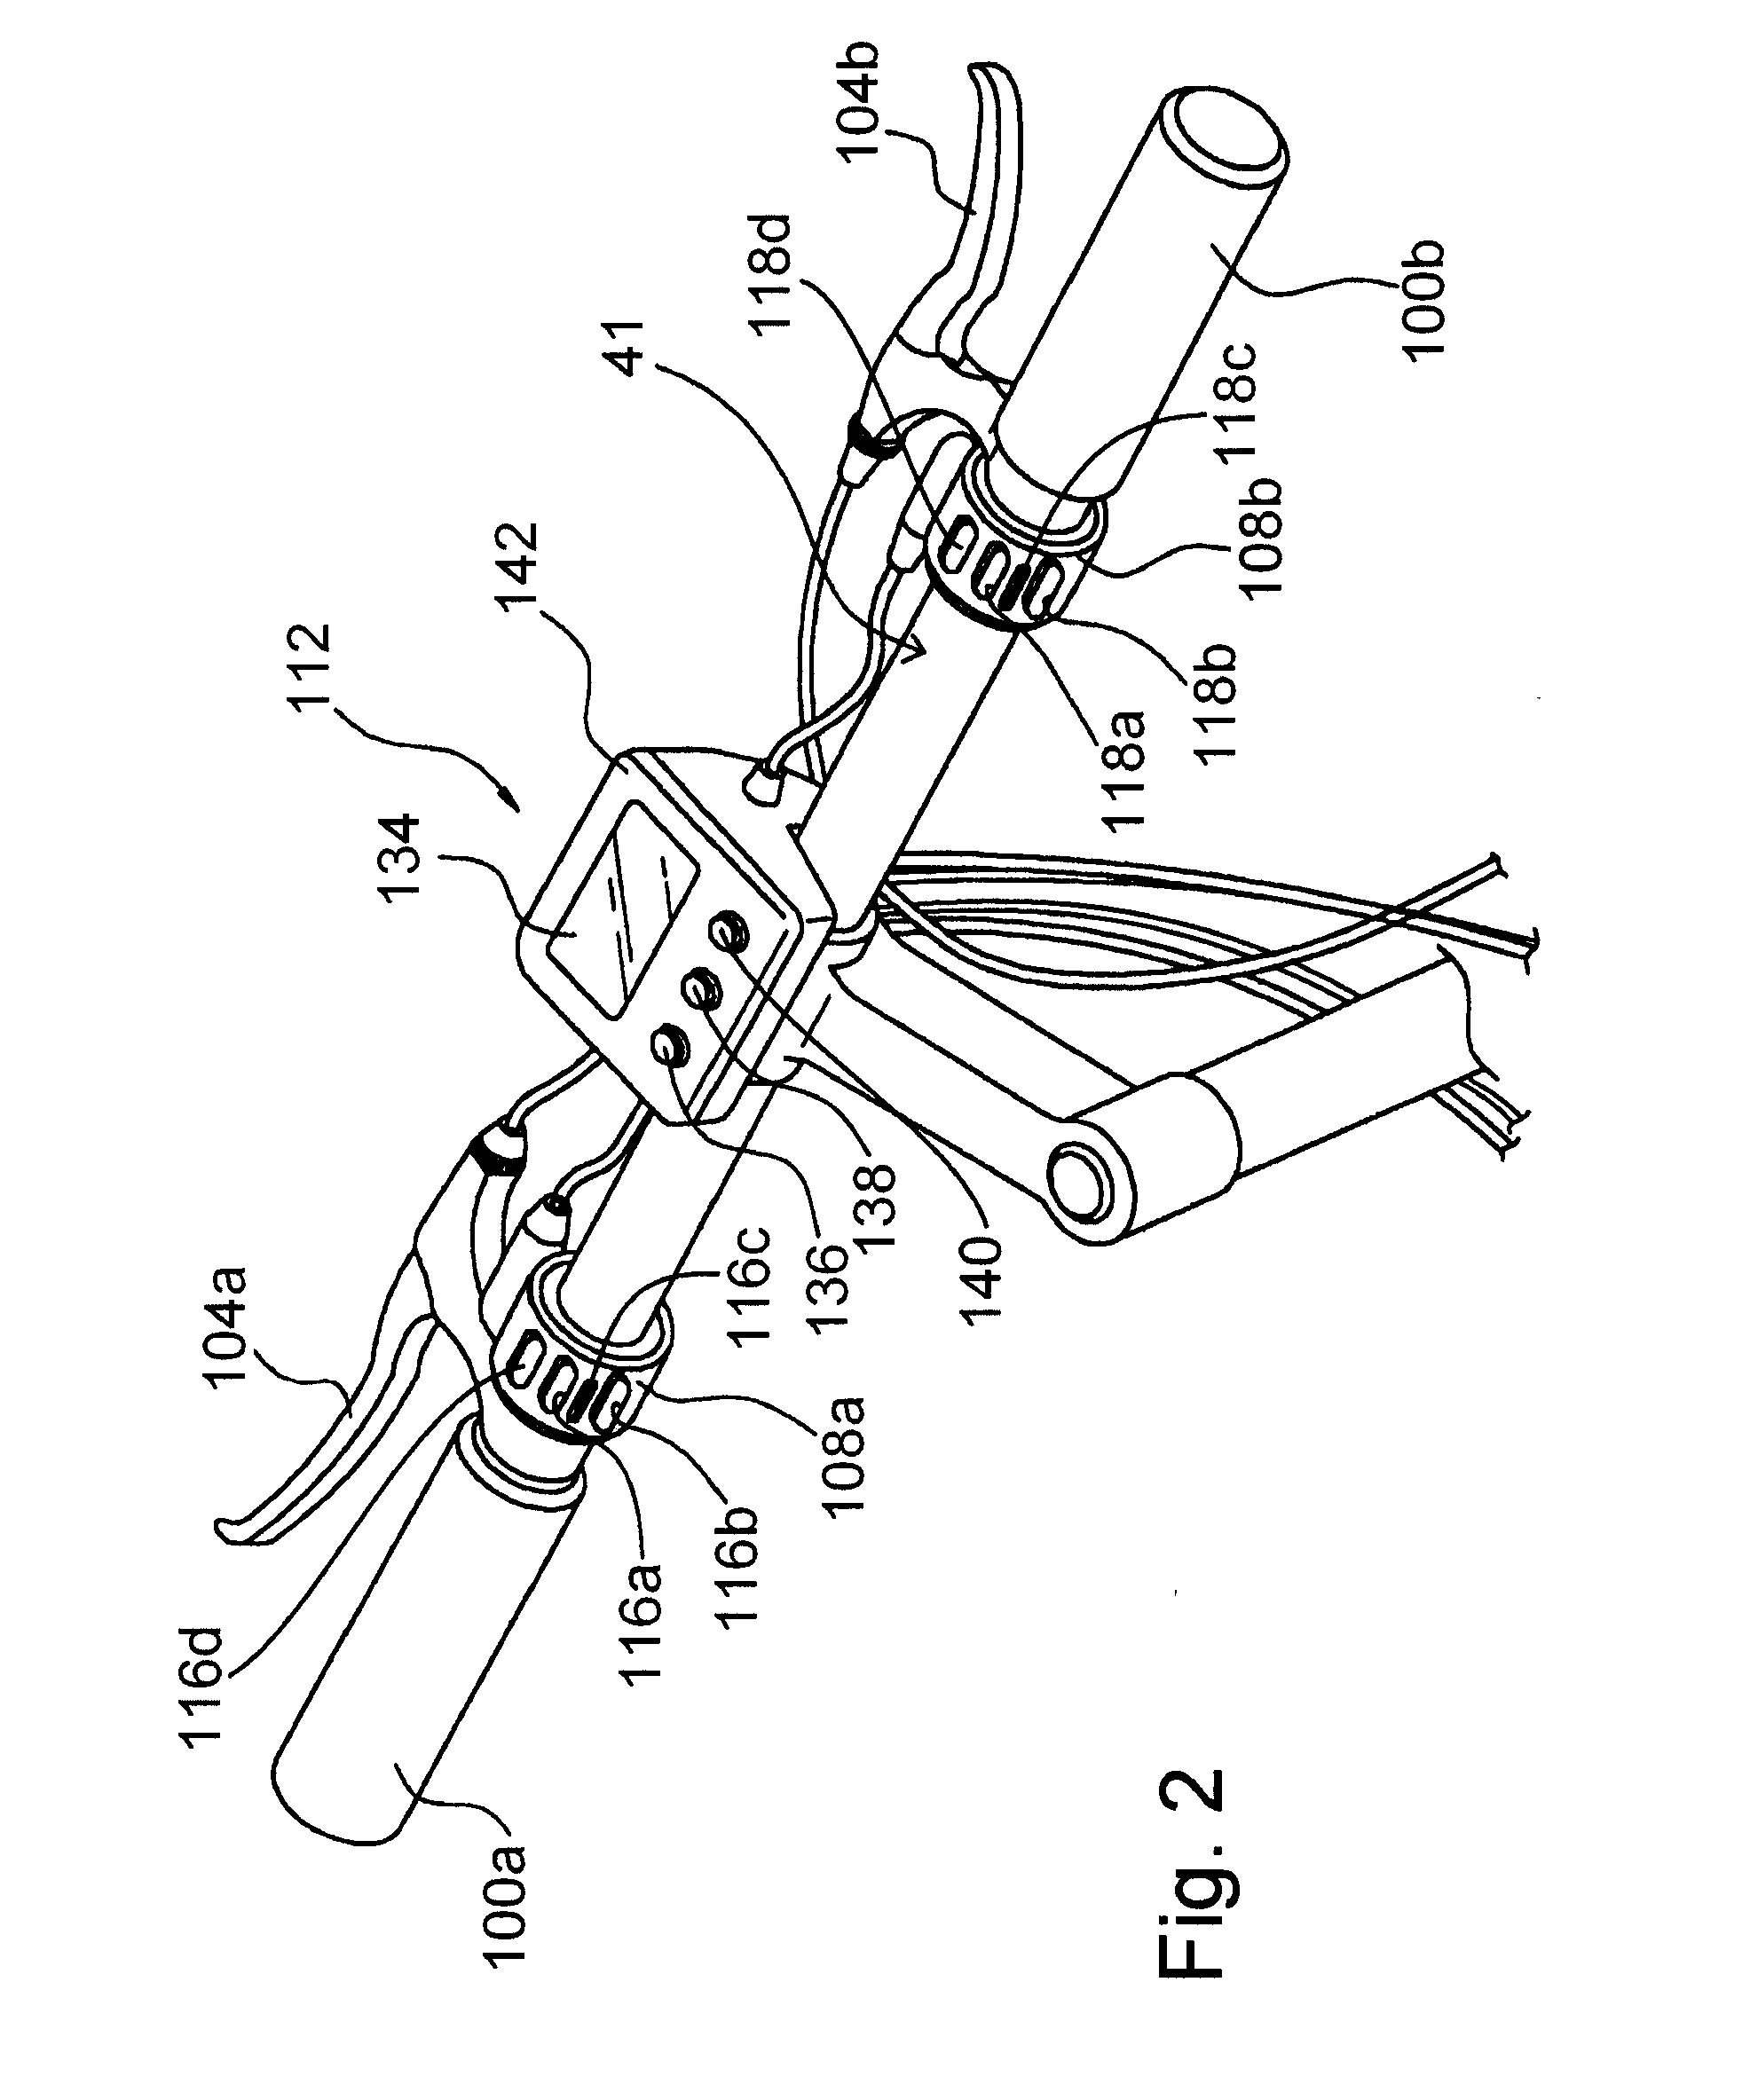 Apparatus for controlling multiple bicycle operating characteristics